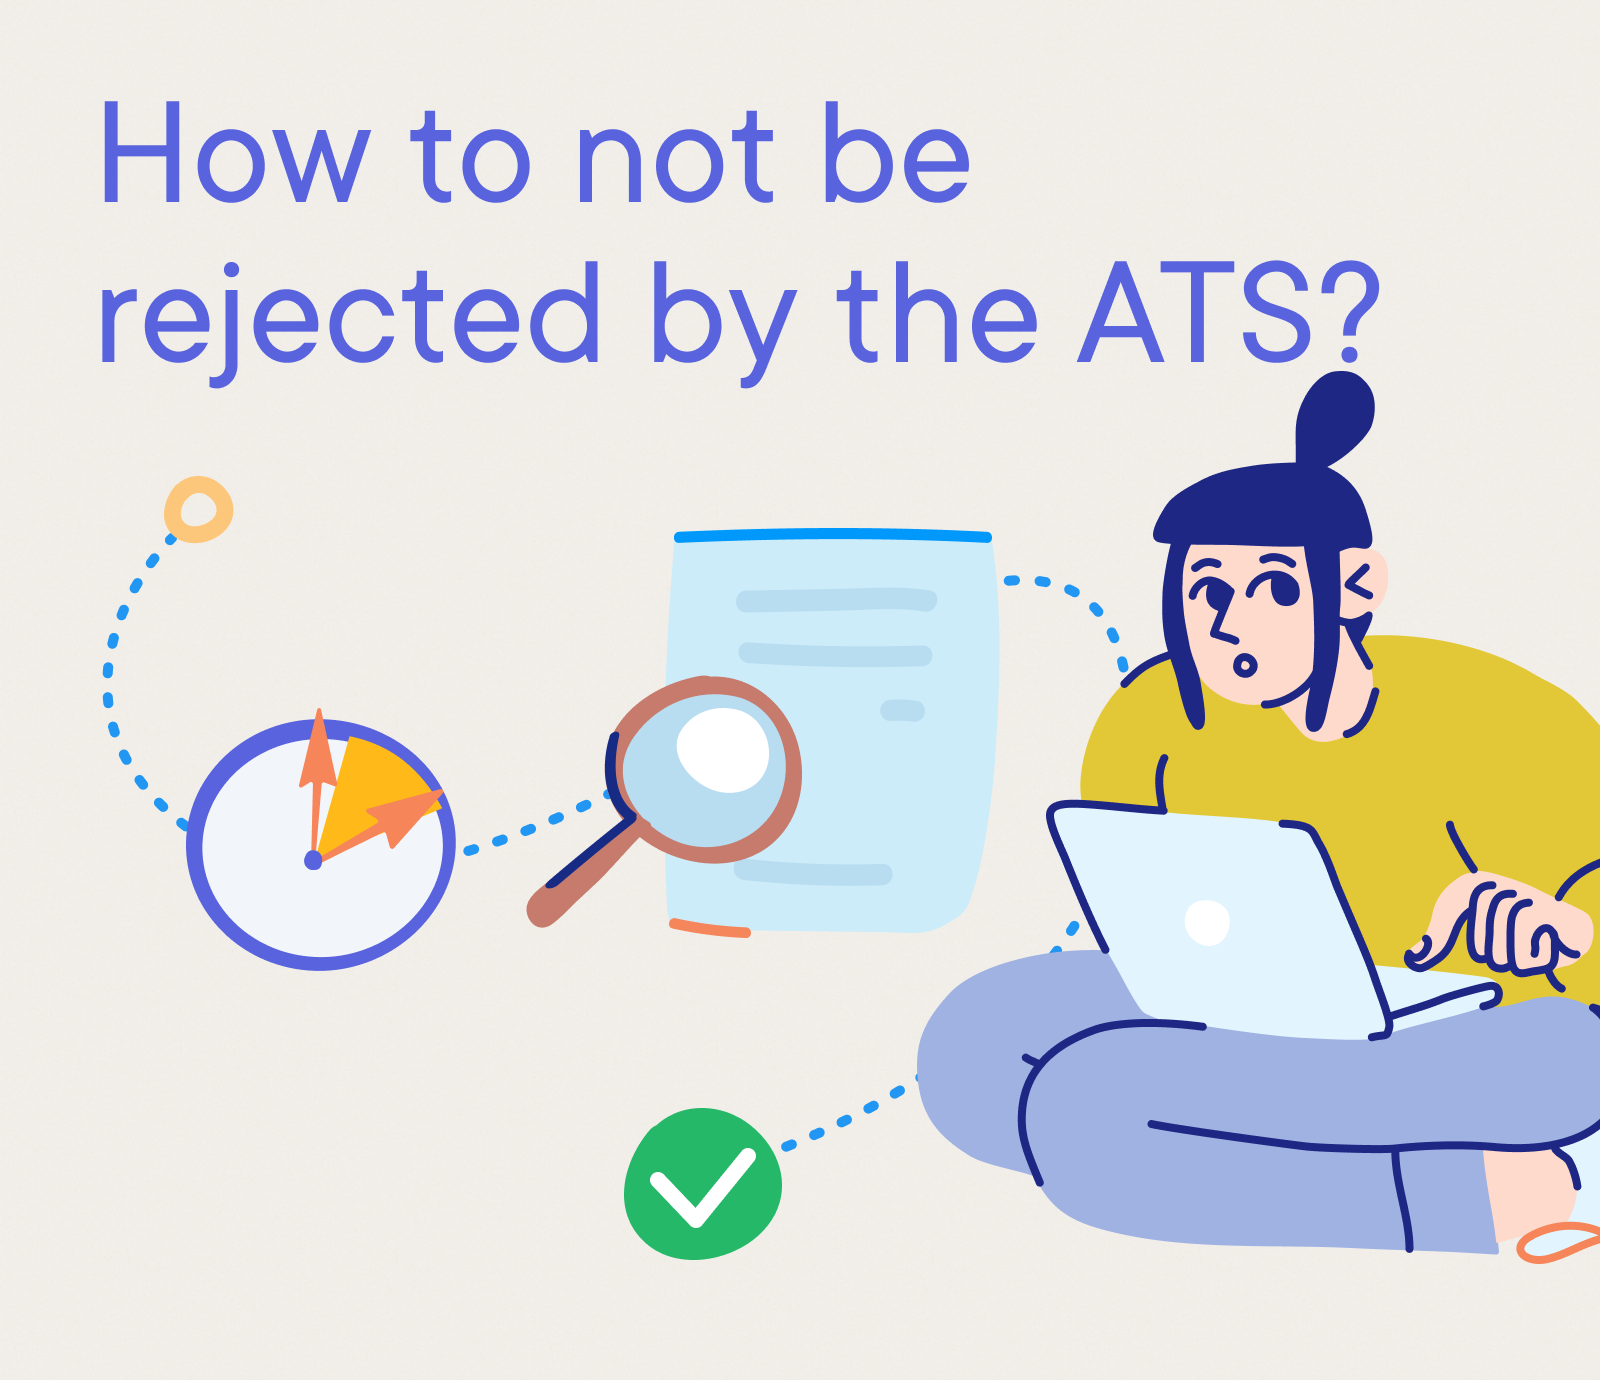 Account Manager - How to not be rejected by the ATS?